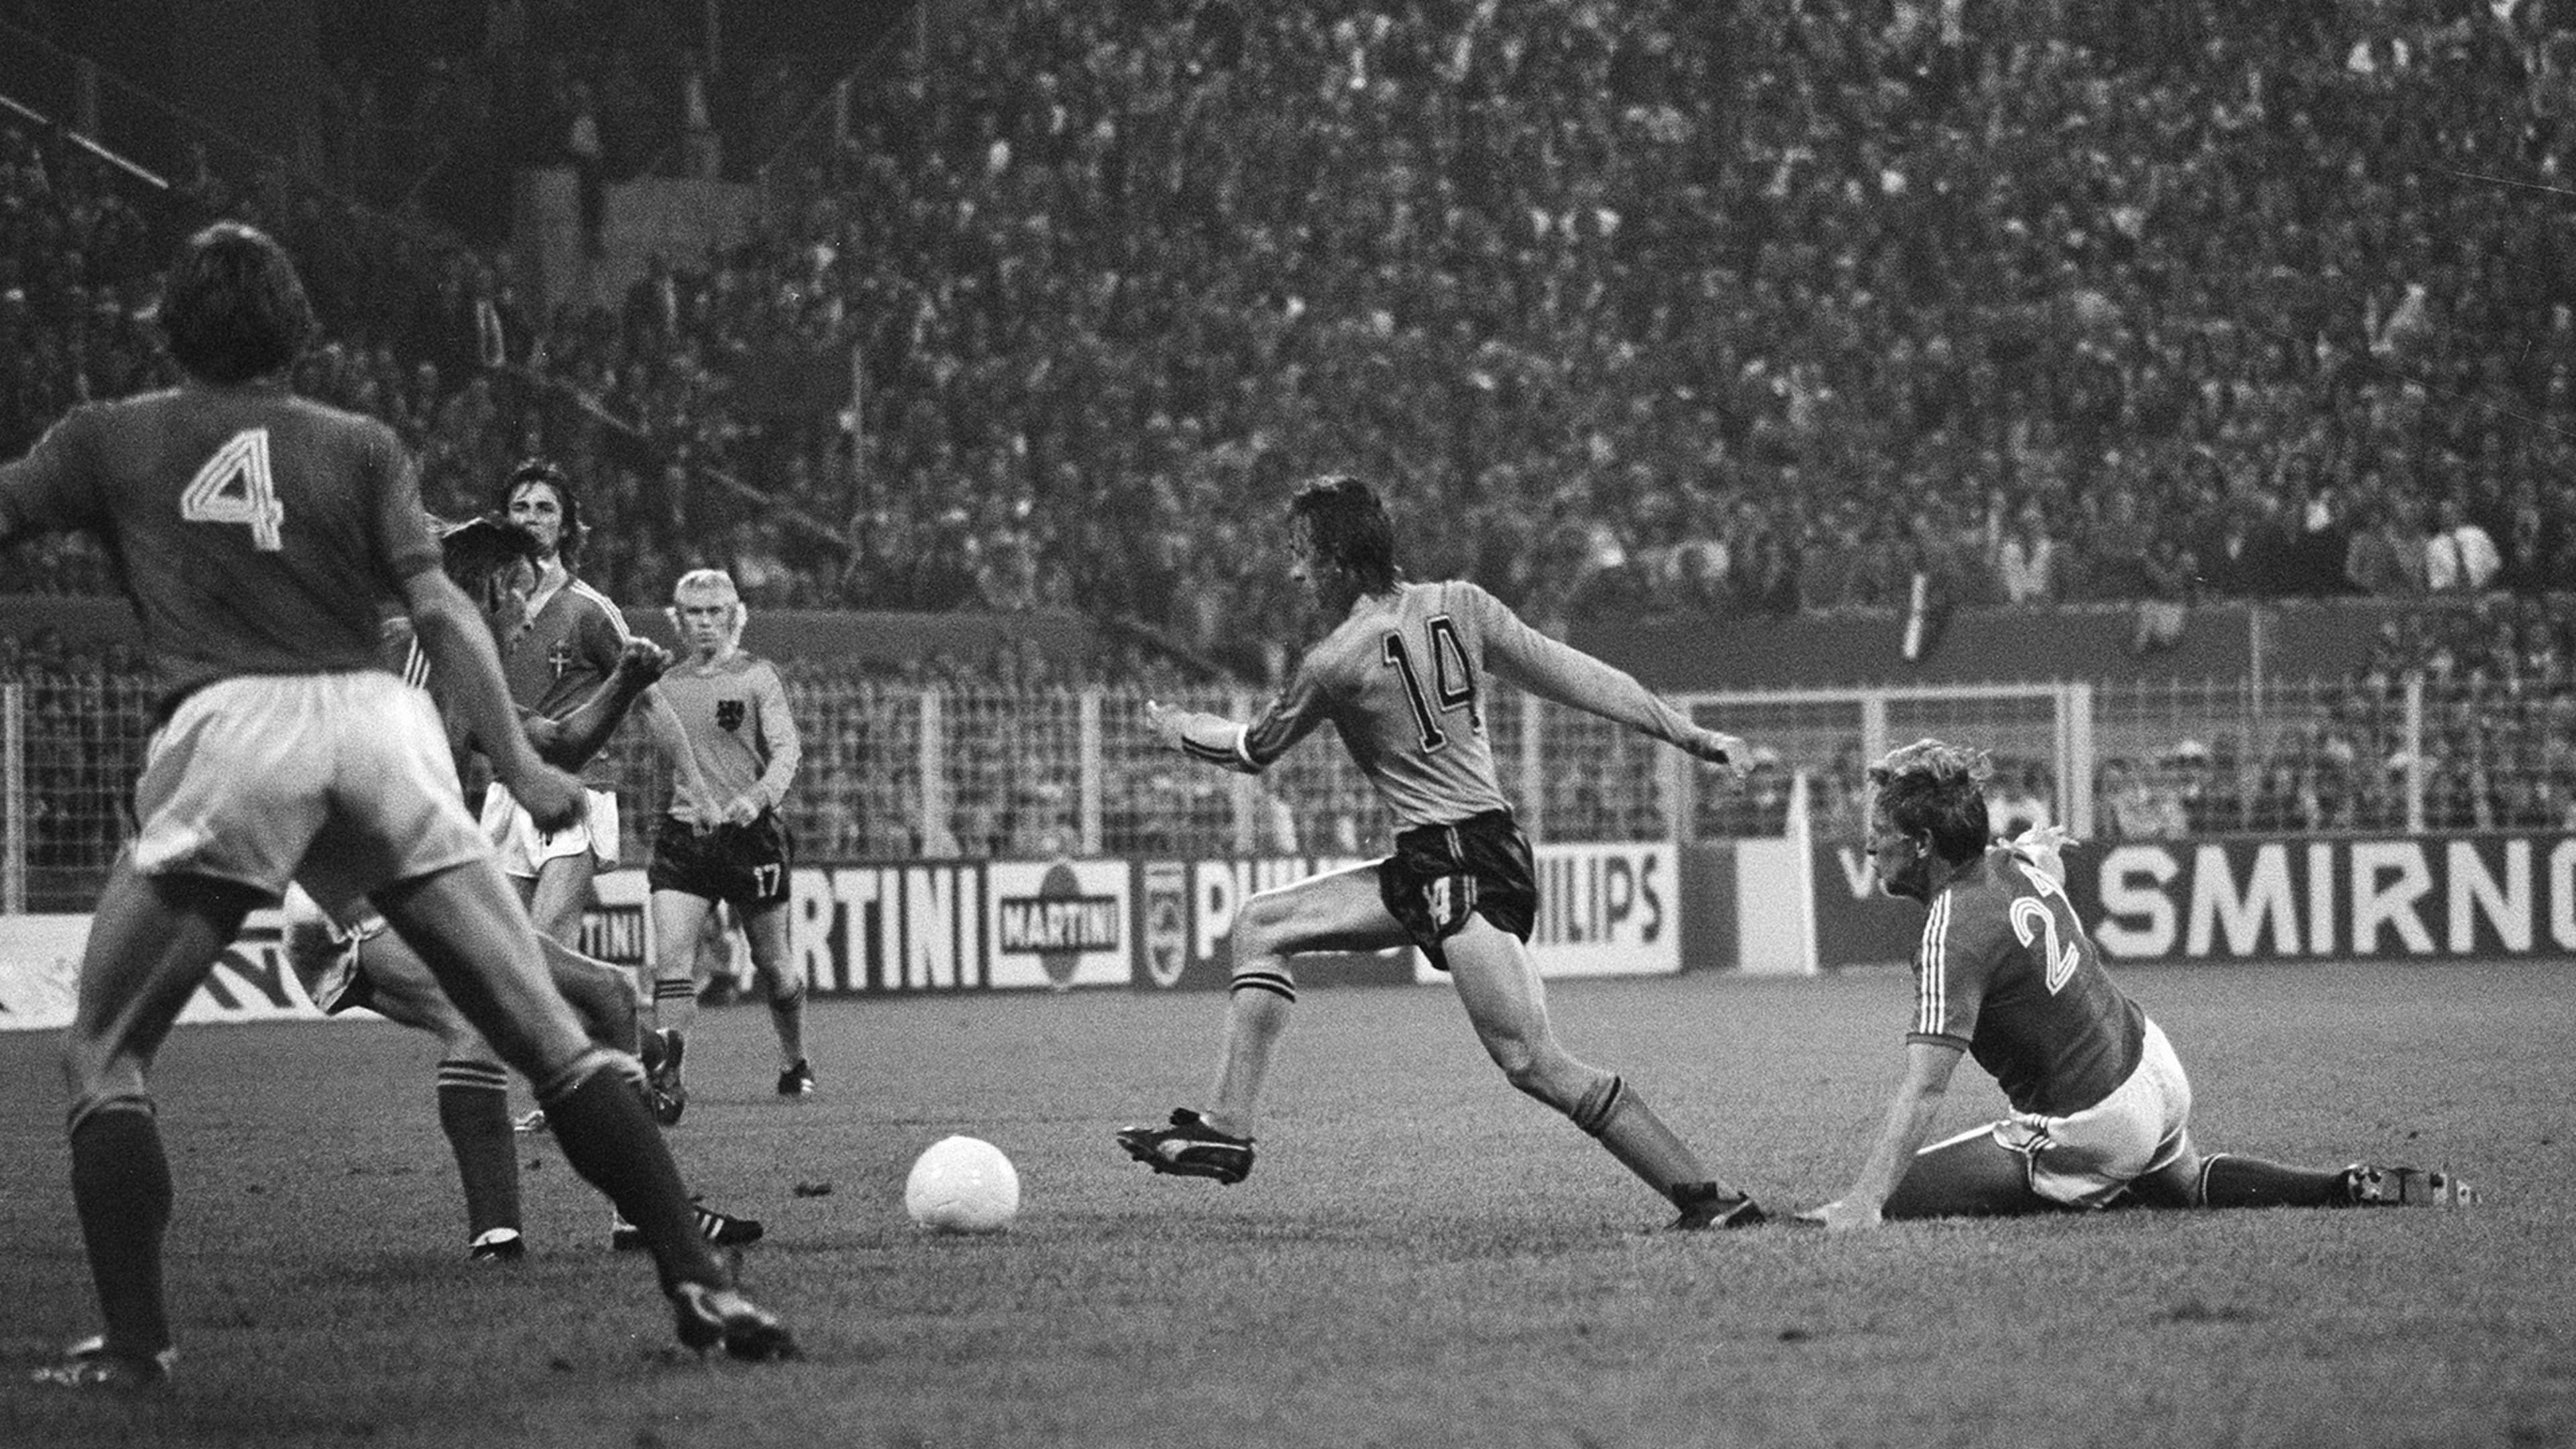 World Cup stunning moments: the Cruyff Turn is born in 1974, Netherlands